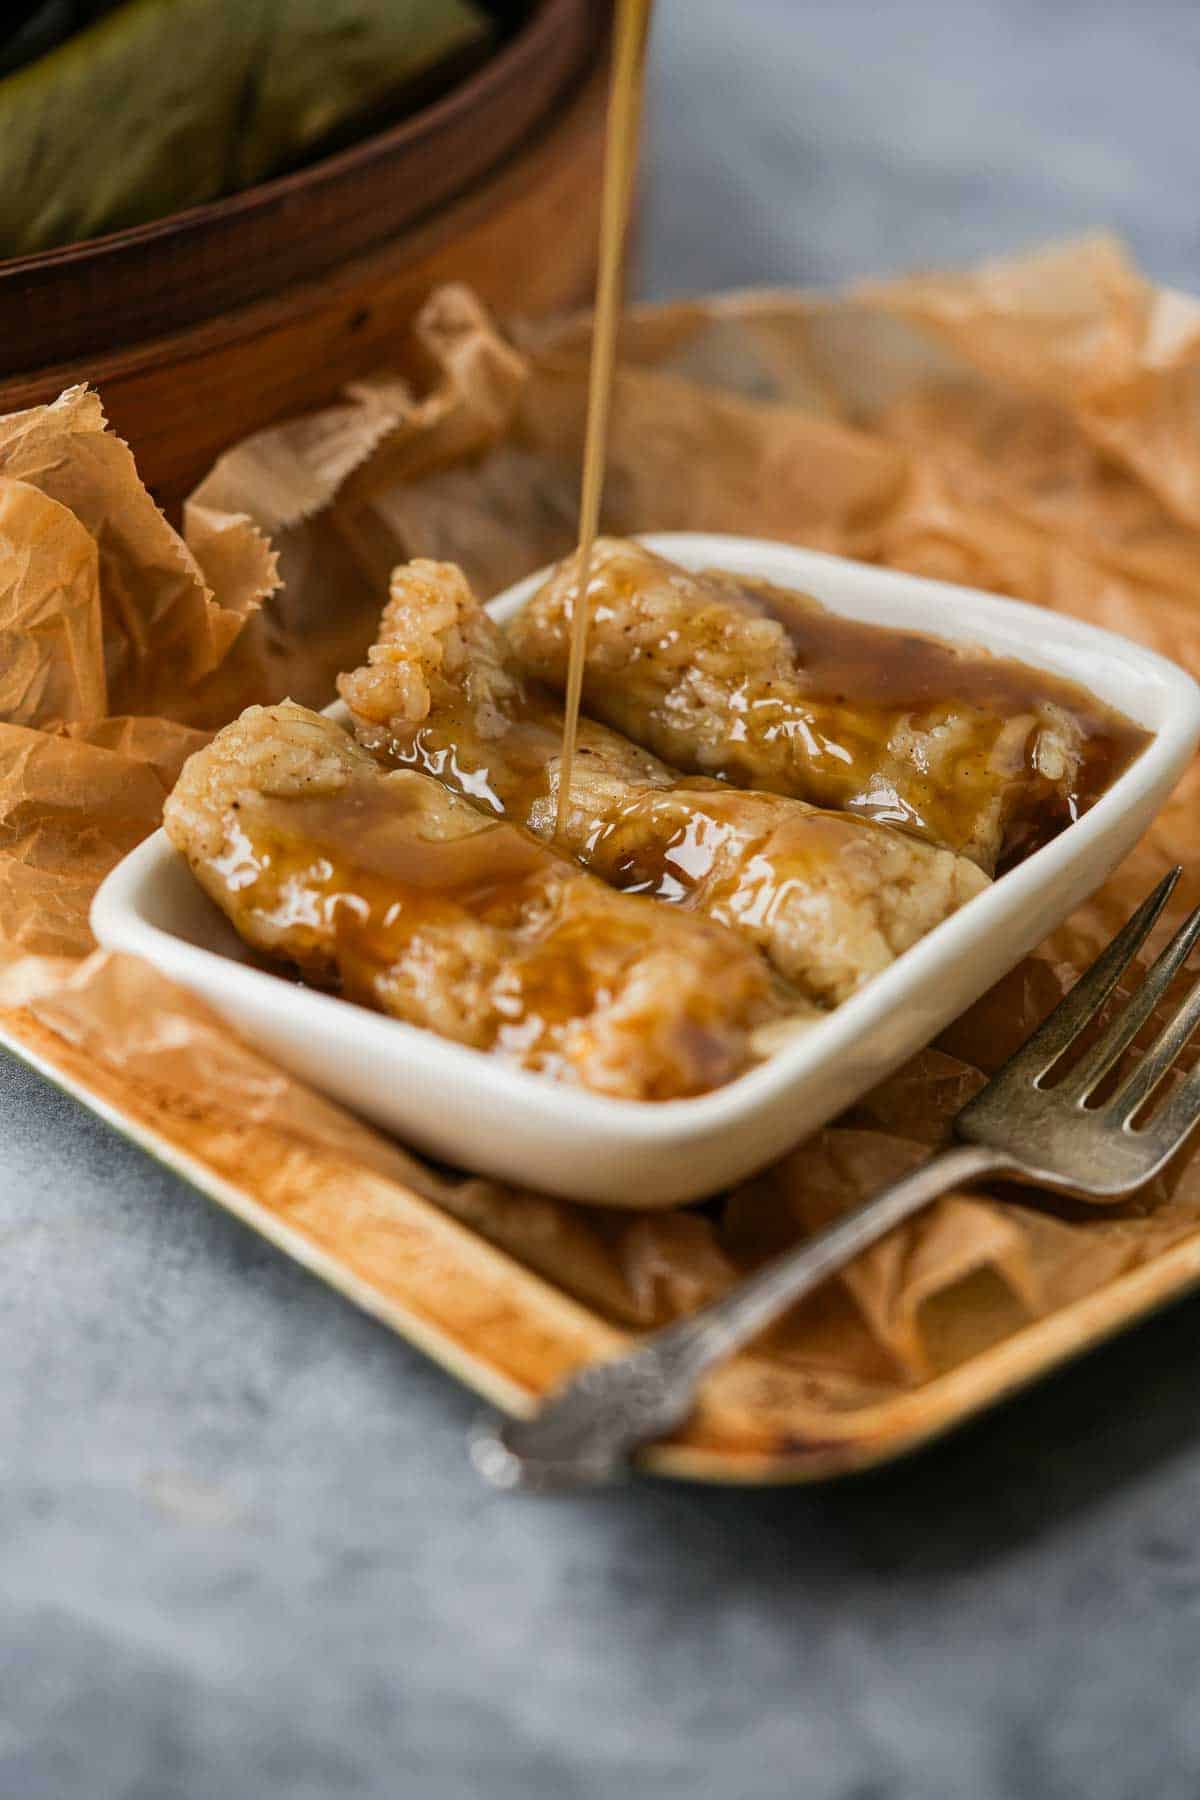 A plate of Suman Malagkit being drizzled with caramel.